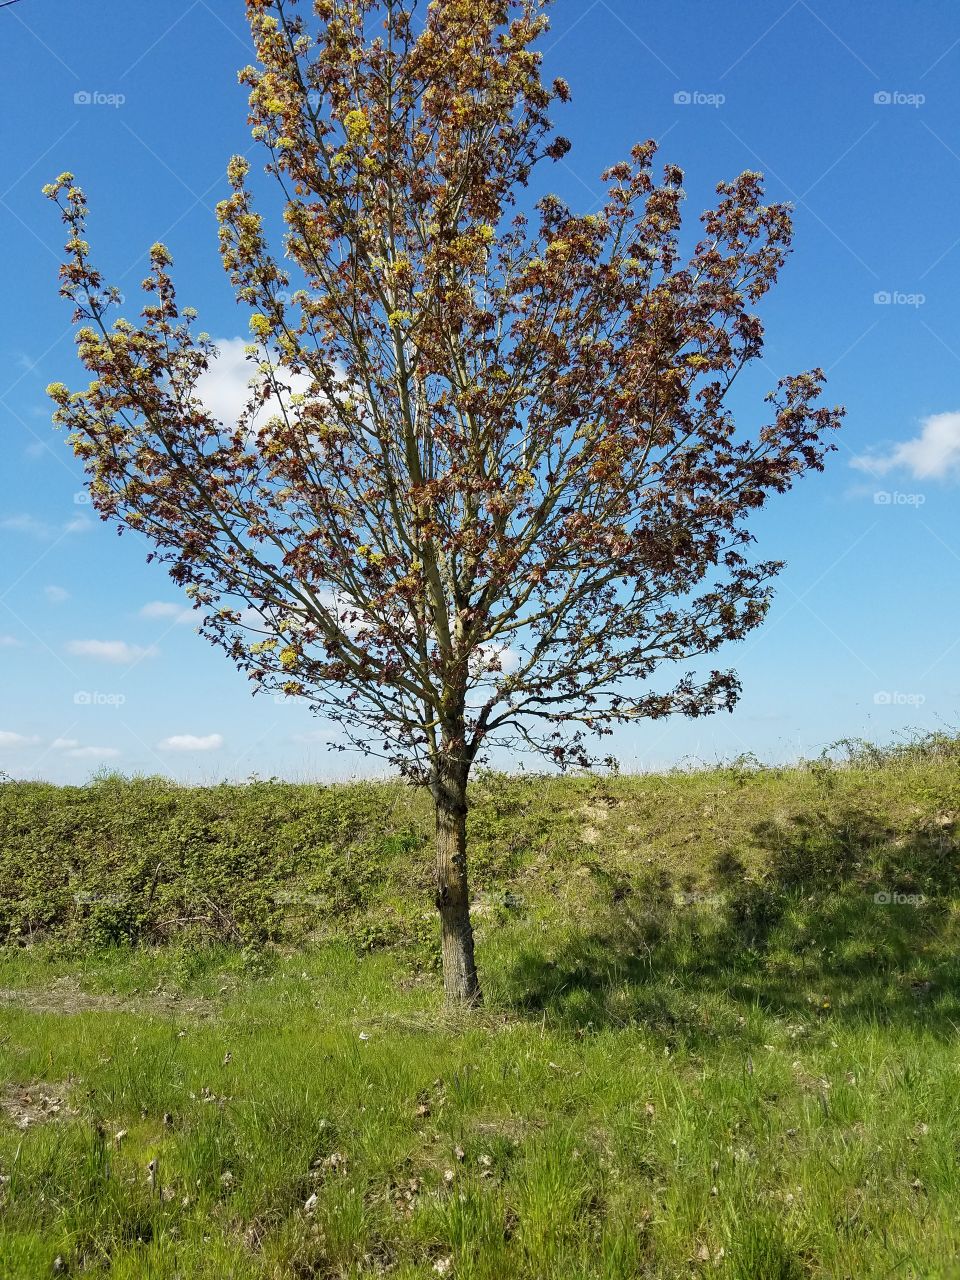 Clear day for a roadside tree.